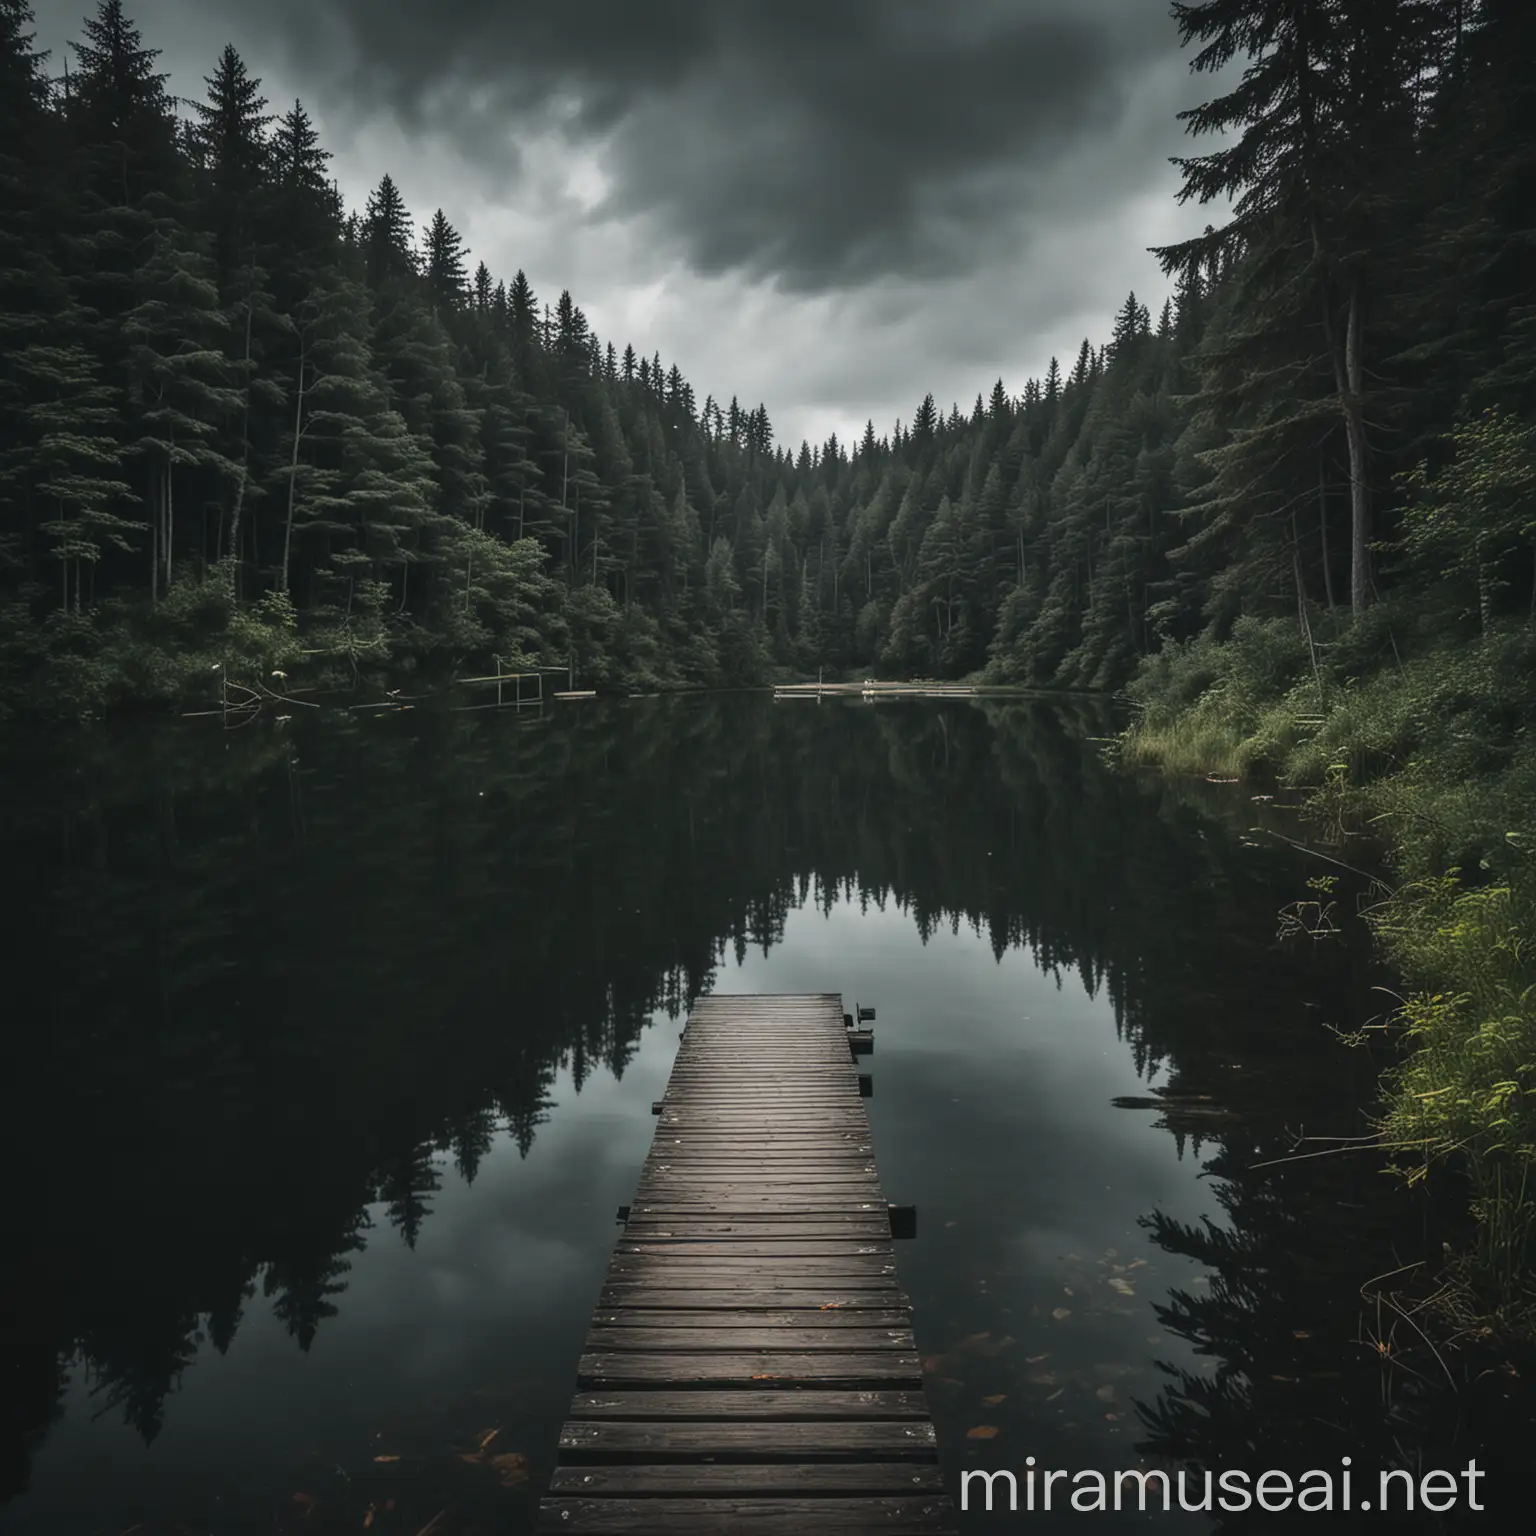 Mysterious Lake Scene with Forest and Dock